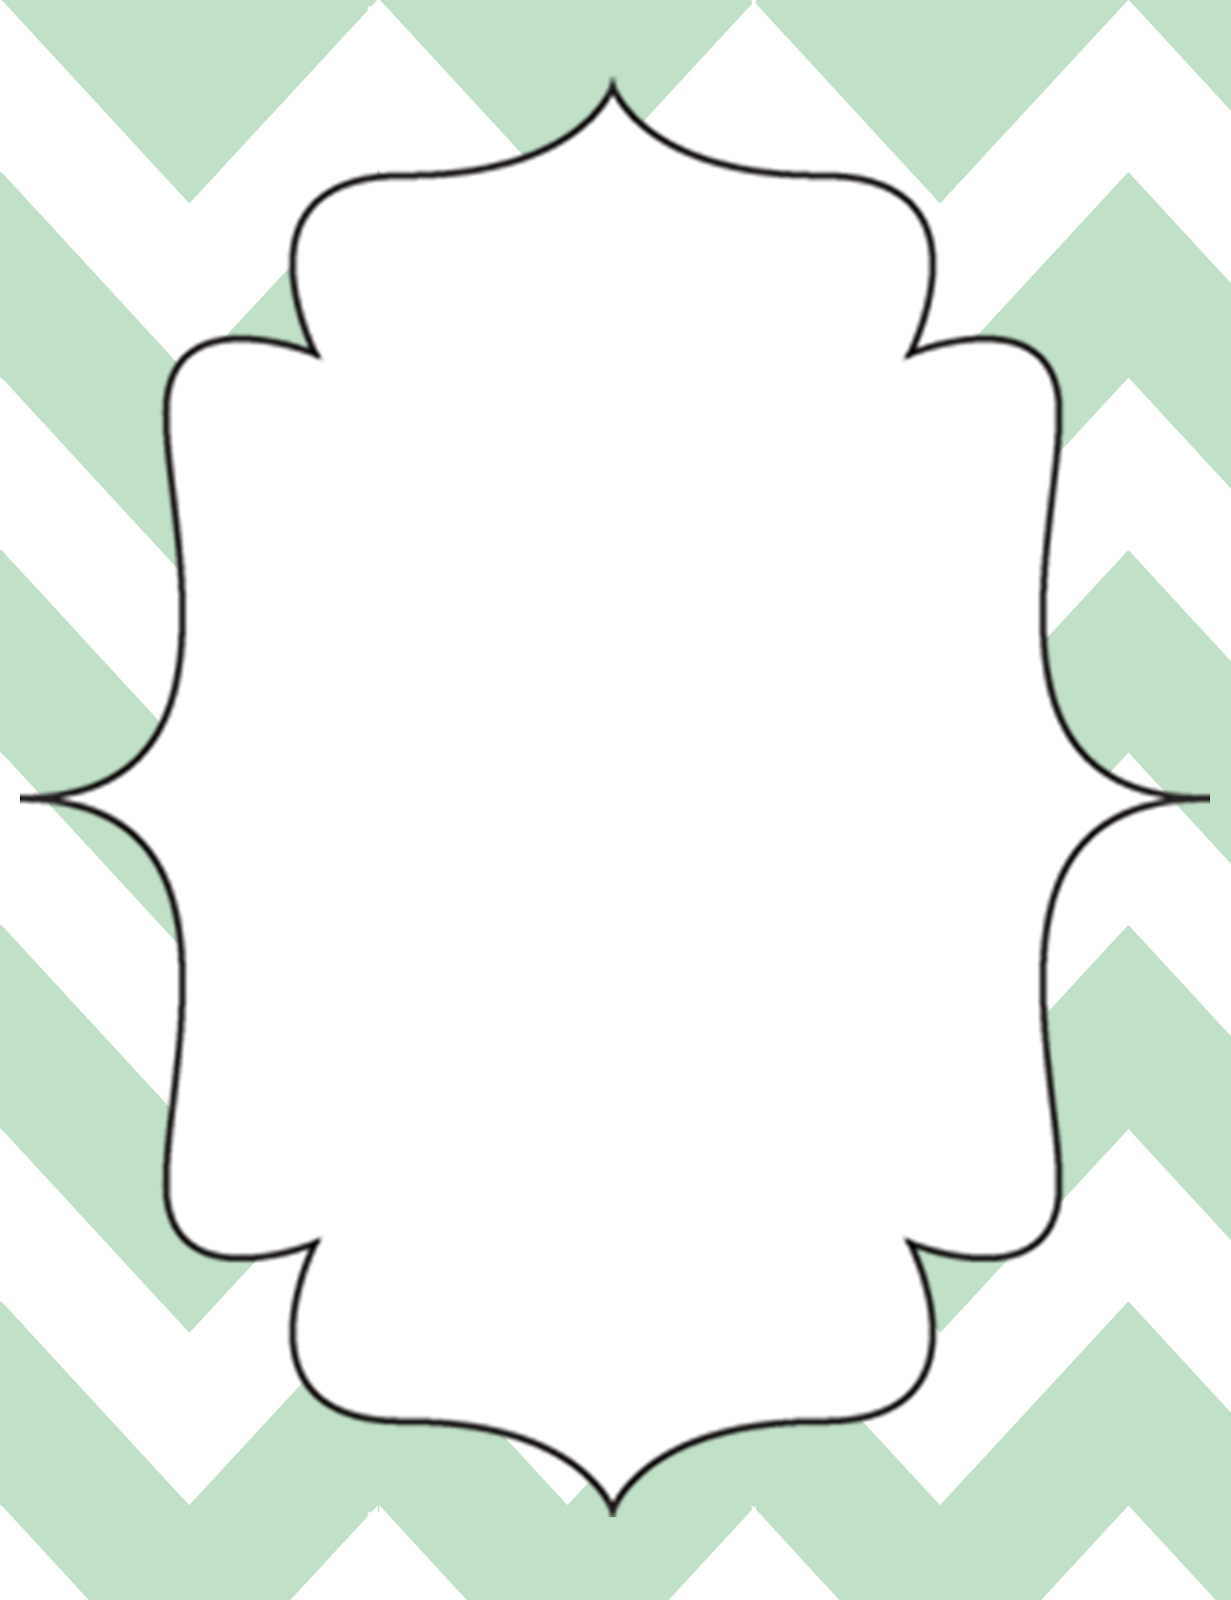 Binder clipart green. Printable cover templates mint